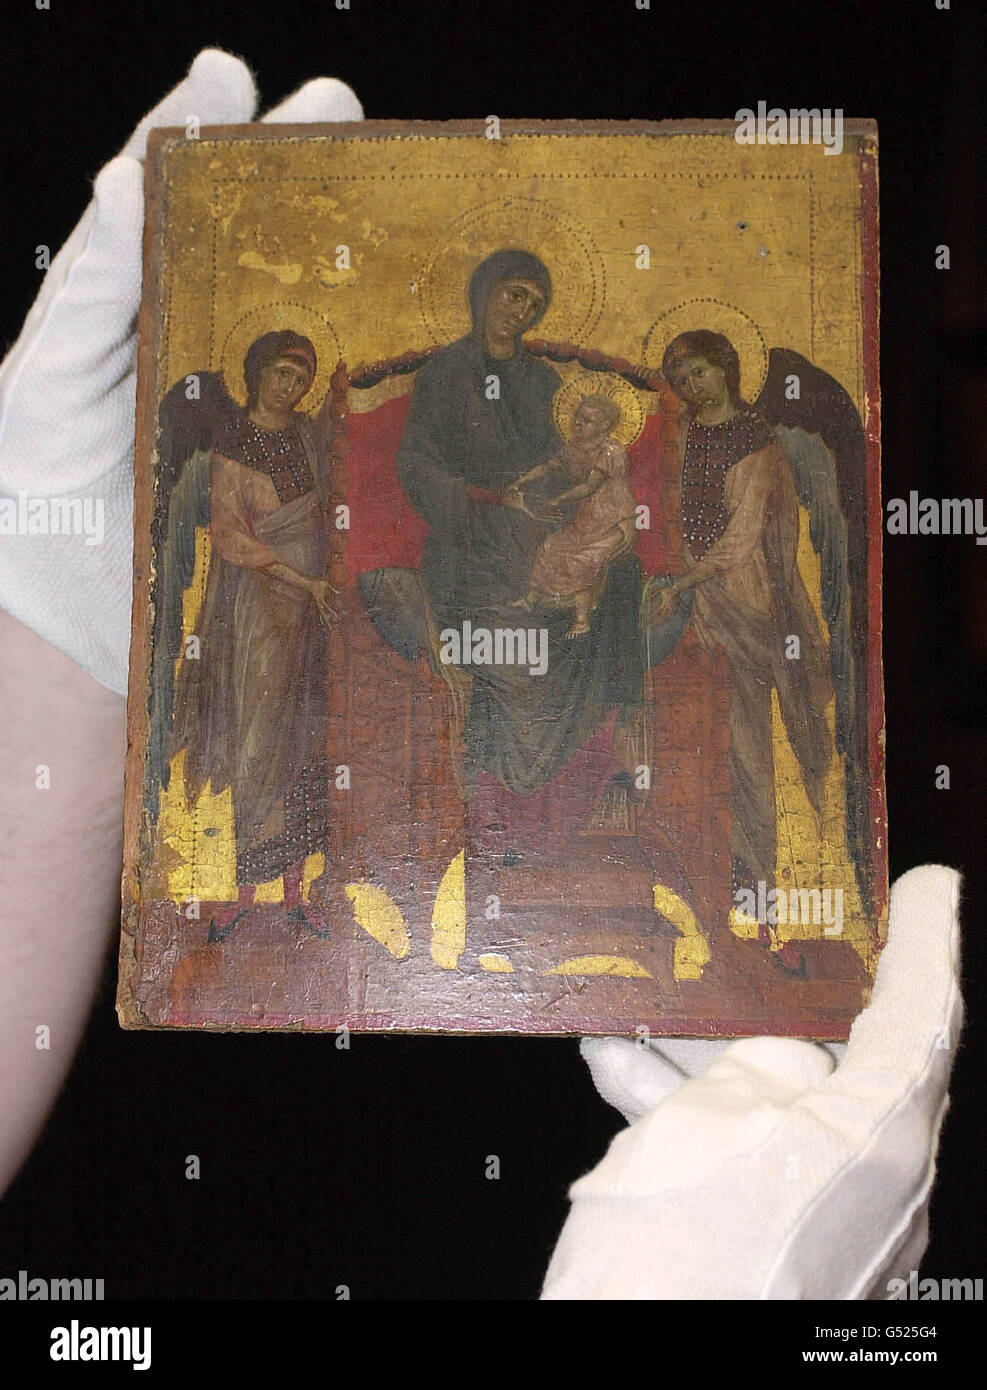 A 13th century gold-ground panel painting by Italian master Cimabue, measuring only ten by eight inches, displayed at Sotheby's, London, before being transported to the National Gallery which negotiated with the auction house to save it for the nation. * The painting will be known as the Benacre Madonna and Child after Benacre Hall in Suffolk, seat of the Gooch family, the house contents auction of which led to Sotheby's art expert Richard Charlton-Jones recognising it as a masterpiece. Stock Photo